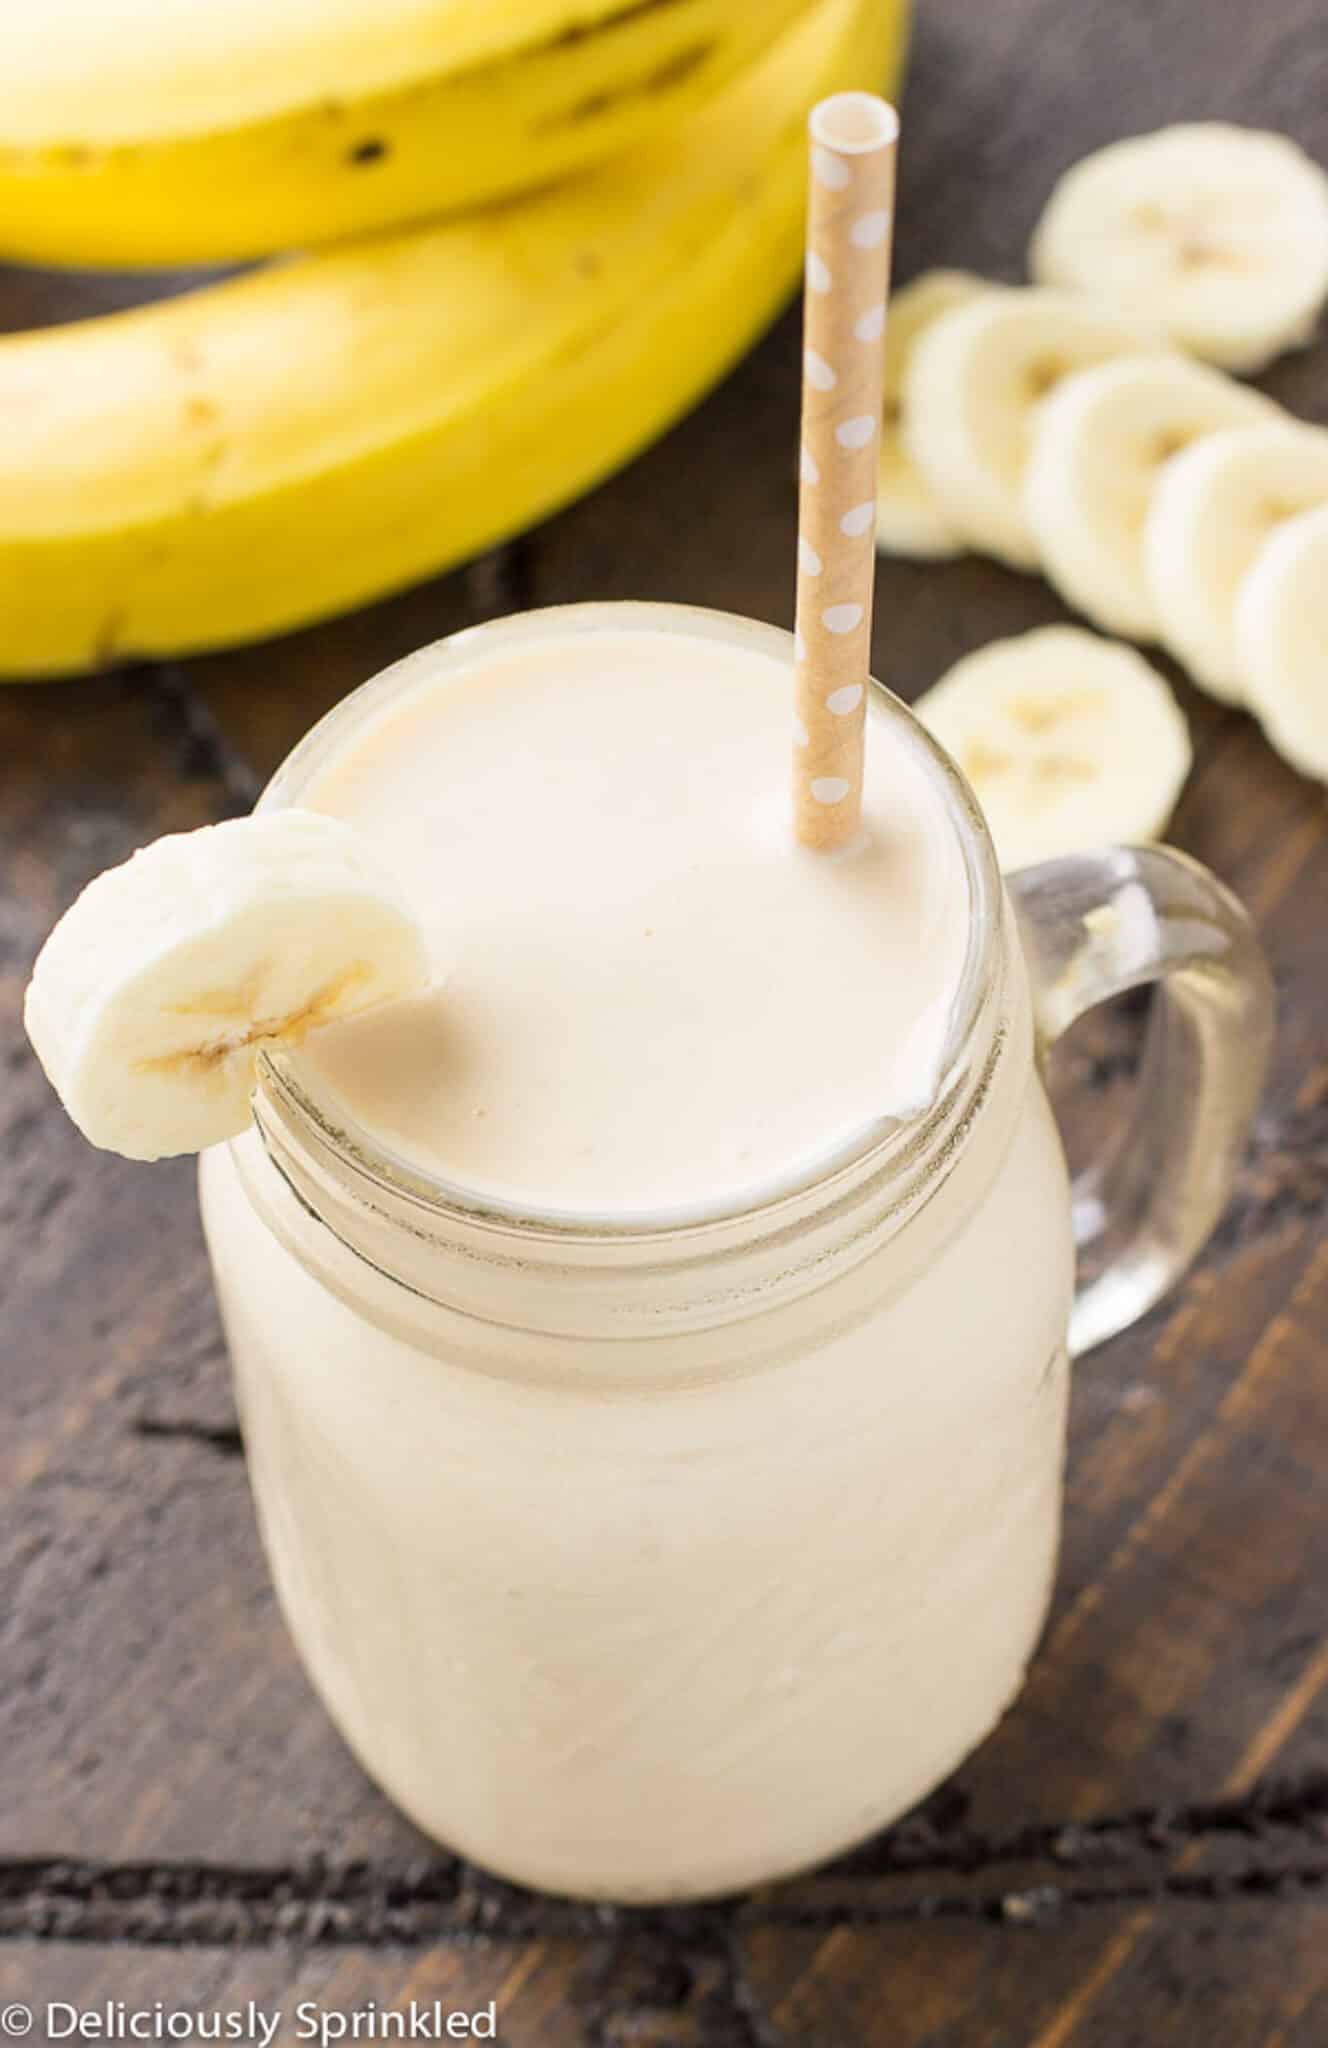 Banana Smoothie prepared and ready to eat.